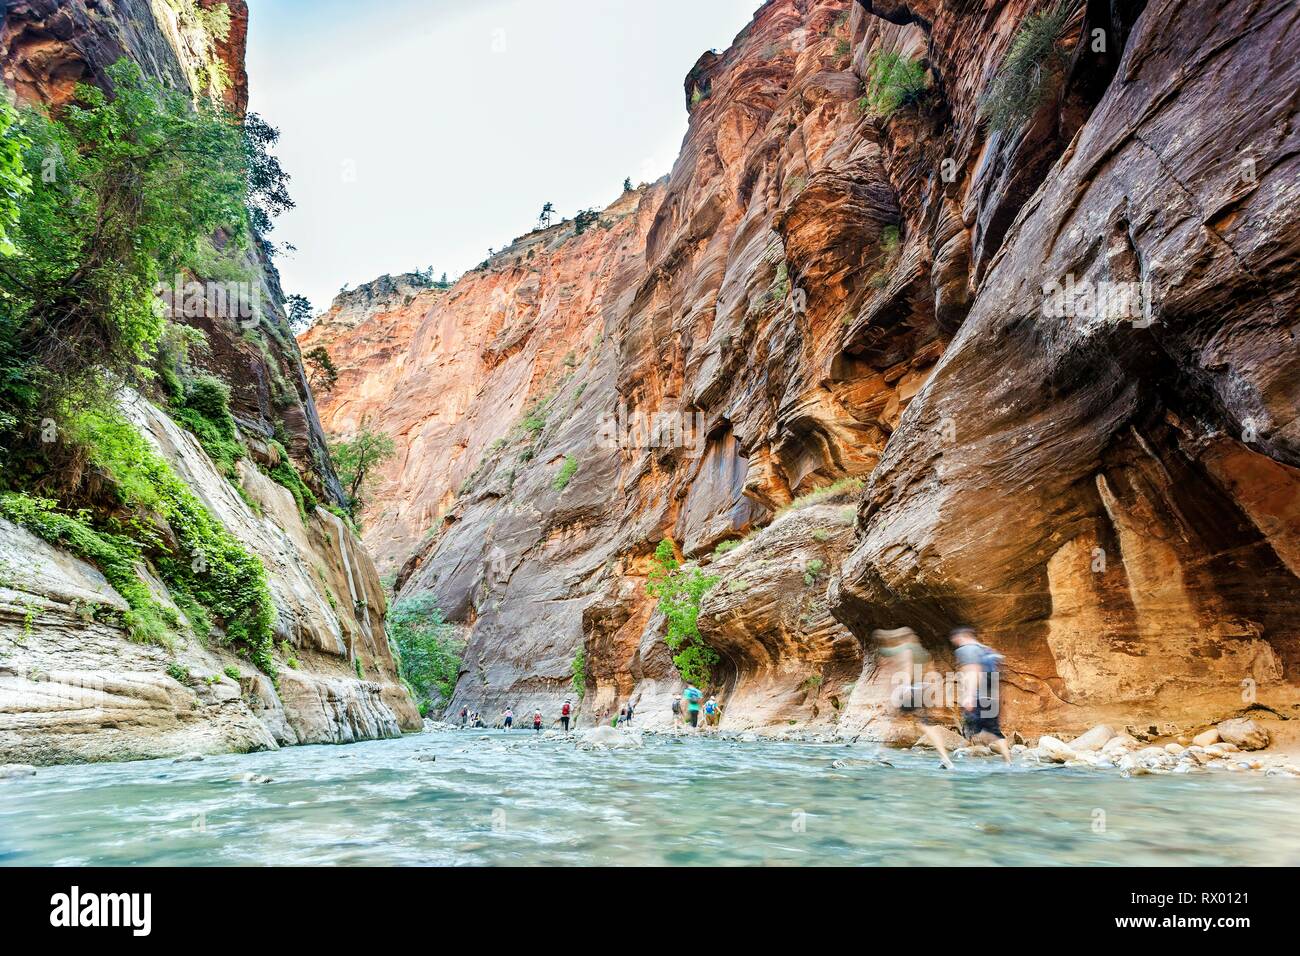 Hikers walking in the canyon filled with water, Zion National Park, Utah, USA Stock Photo